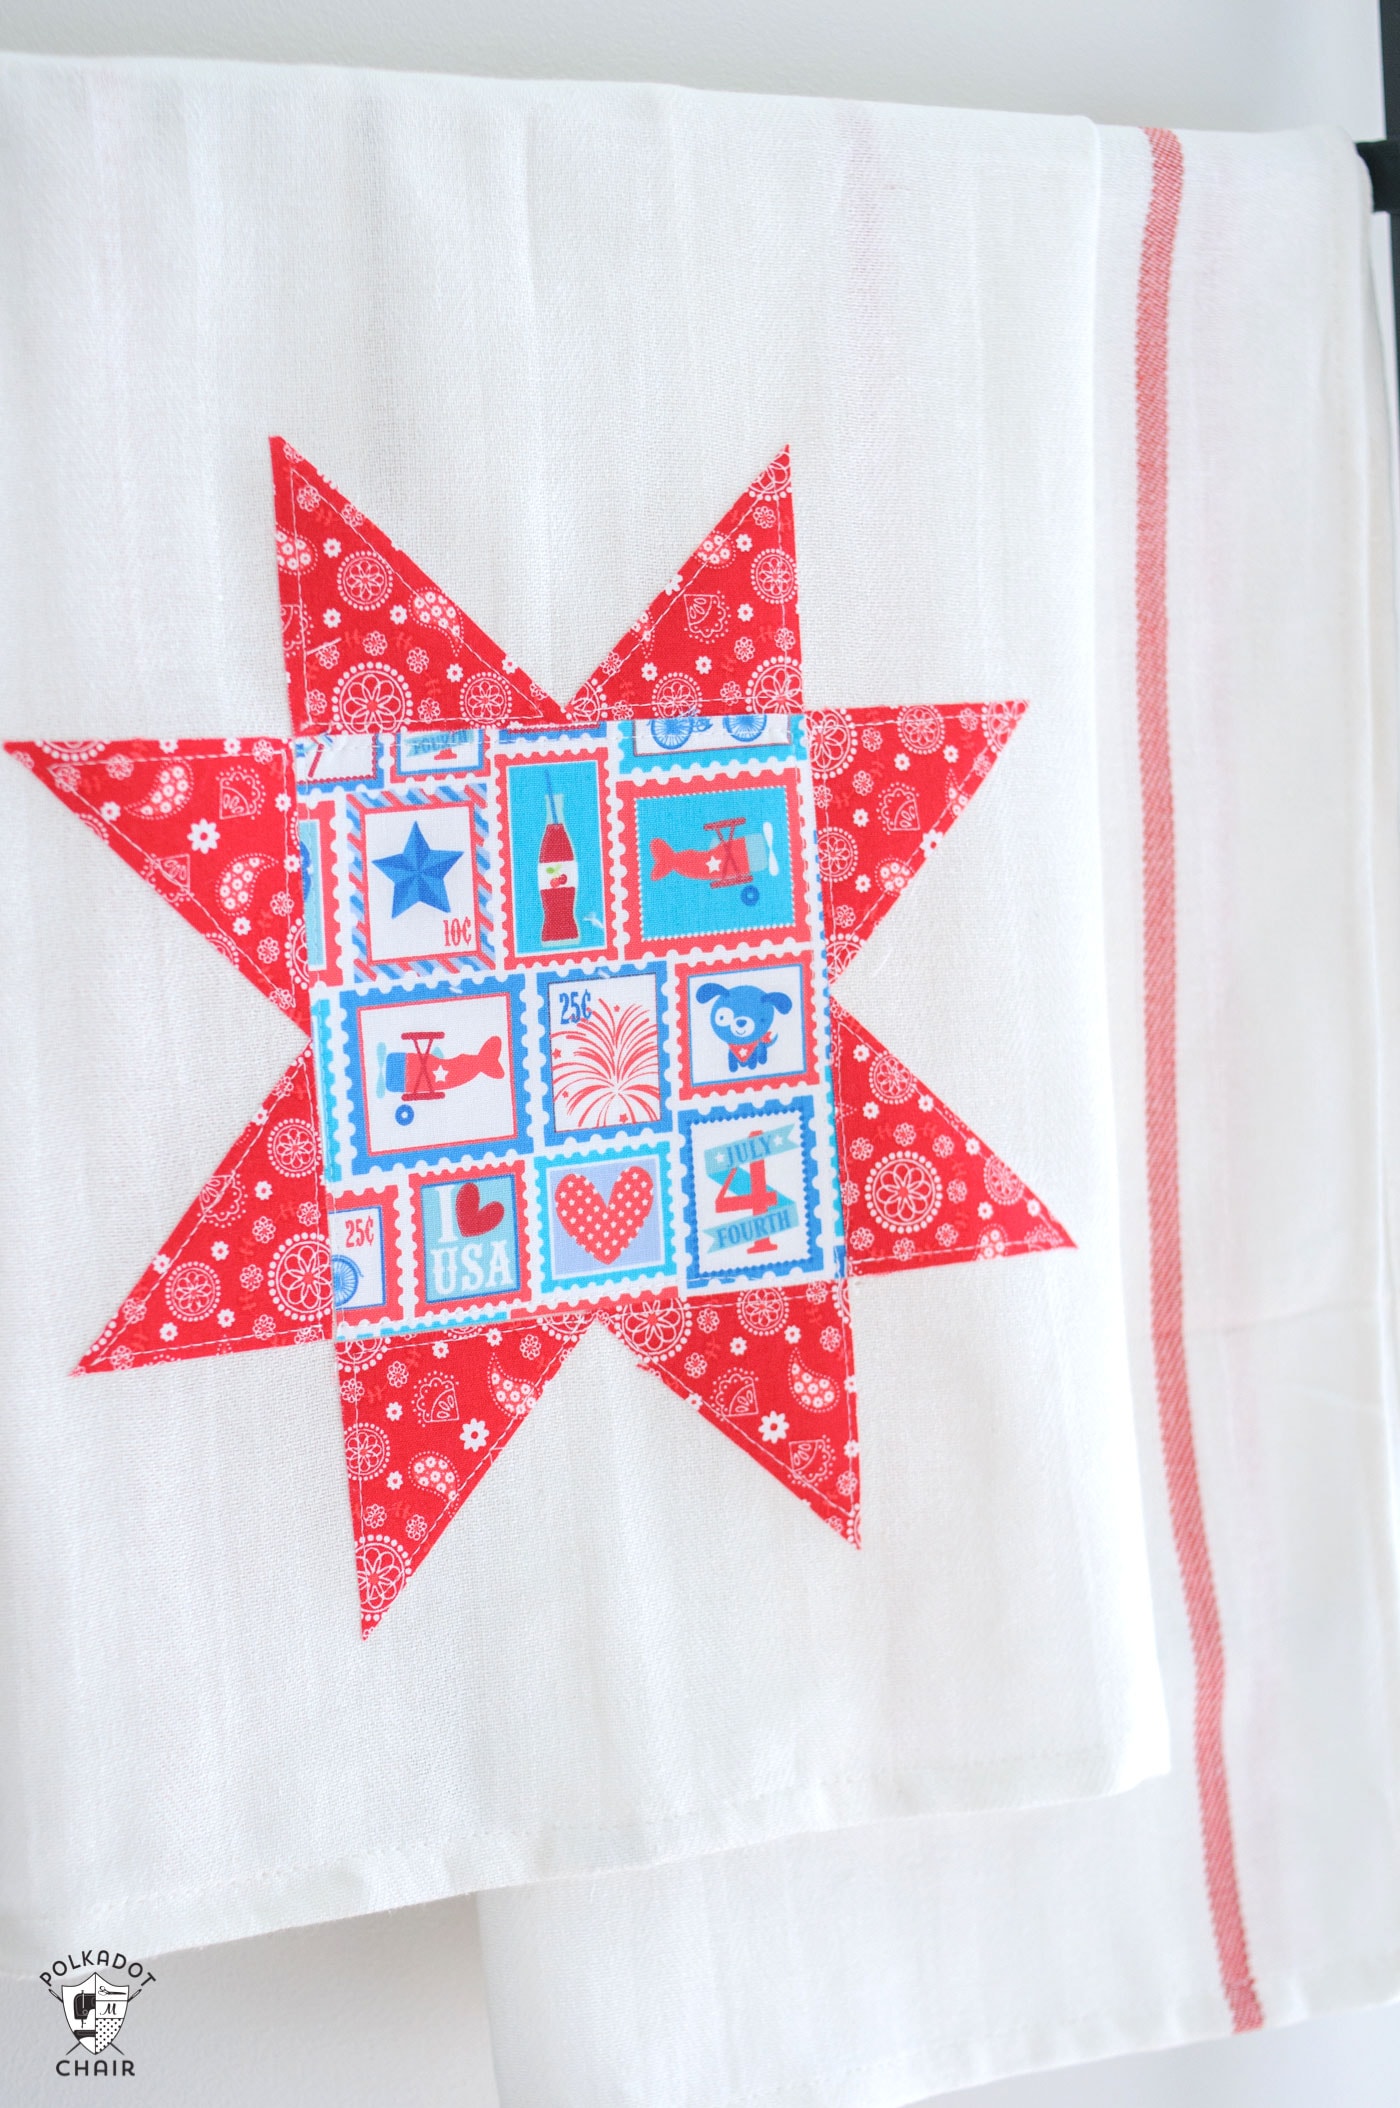 red white and blue star tea towel hanging on black rack